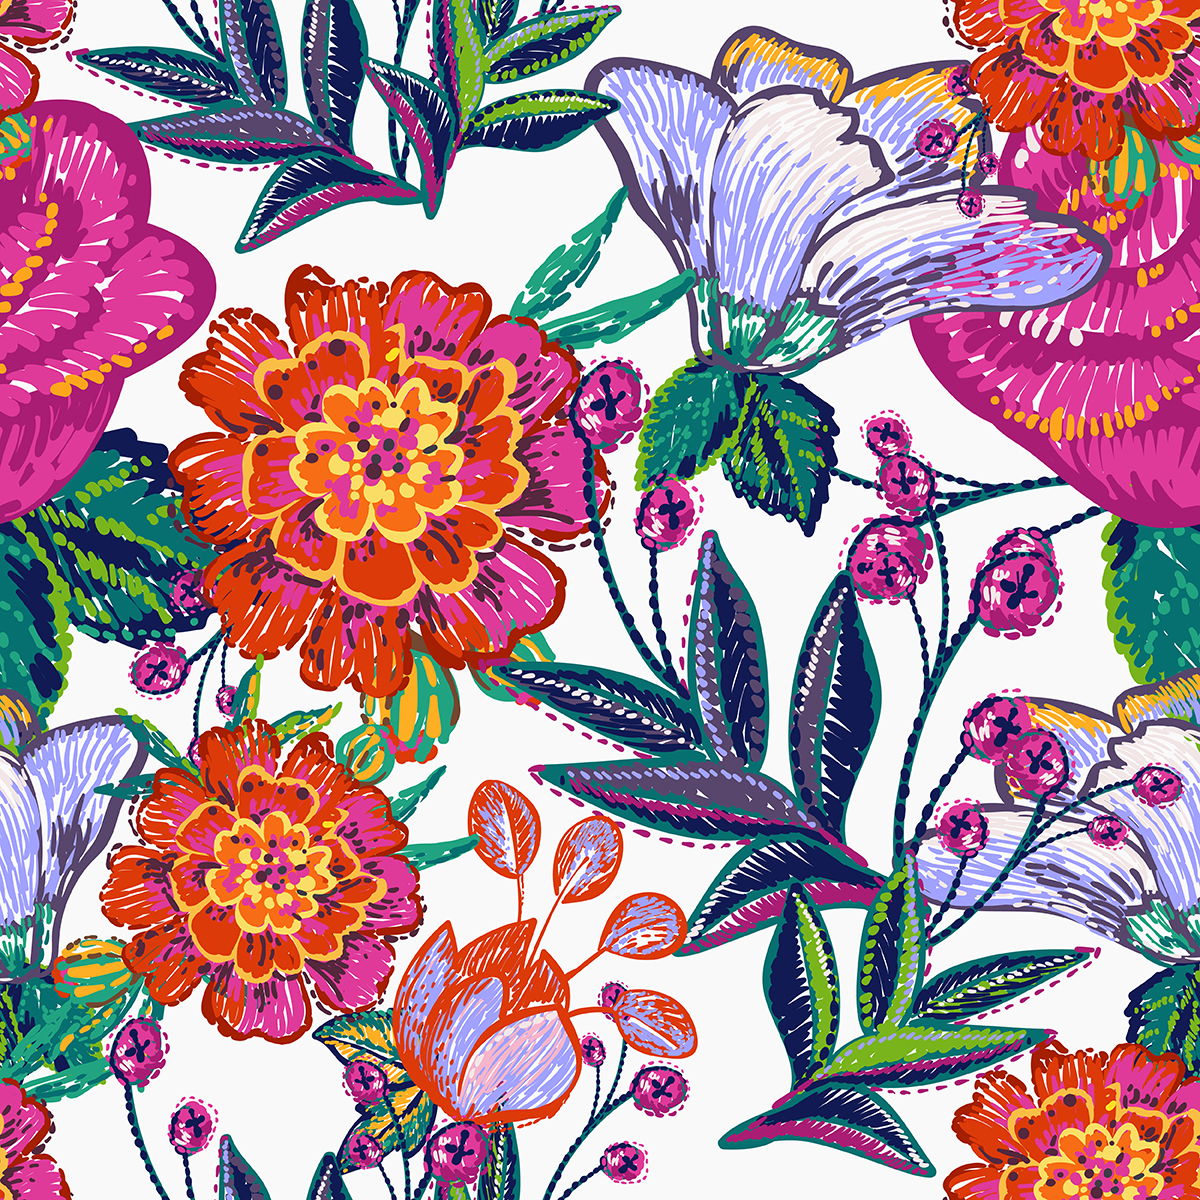 A colorful flower pattern